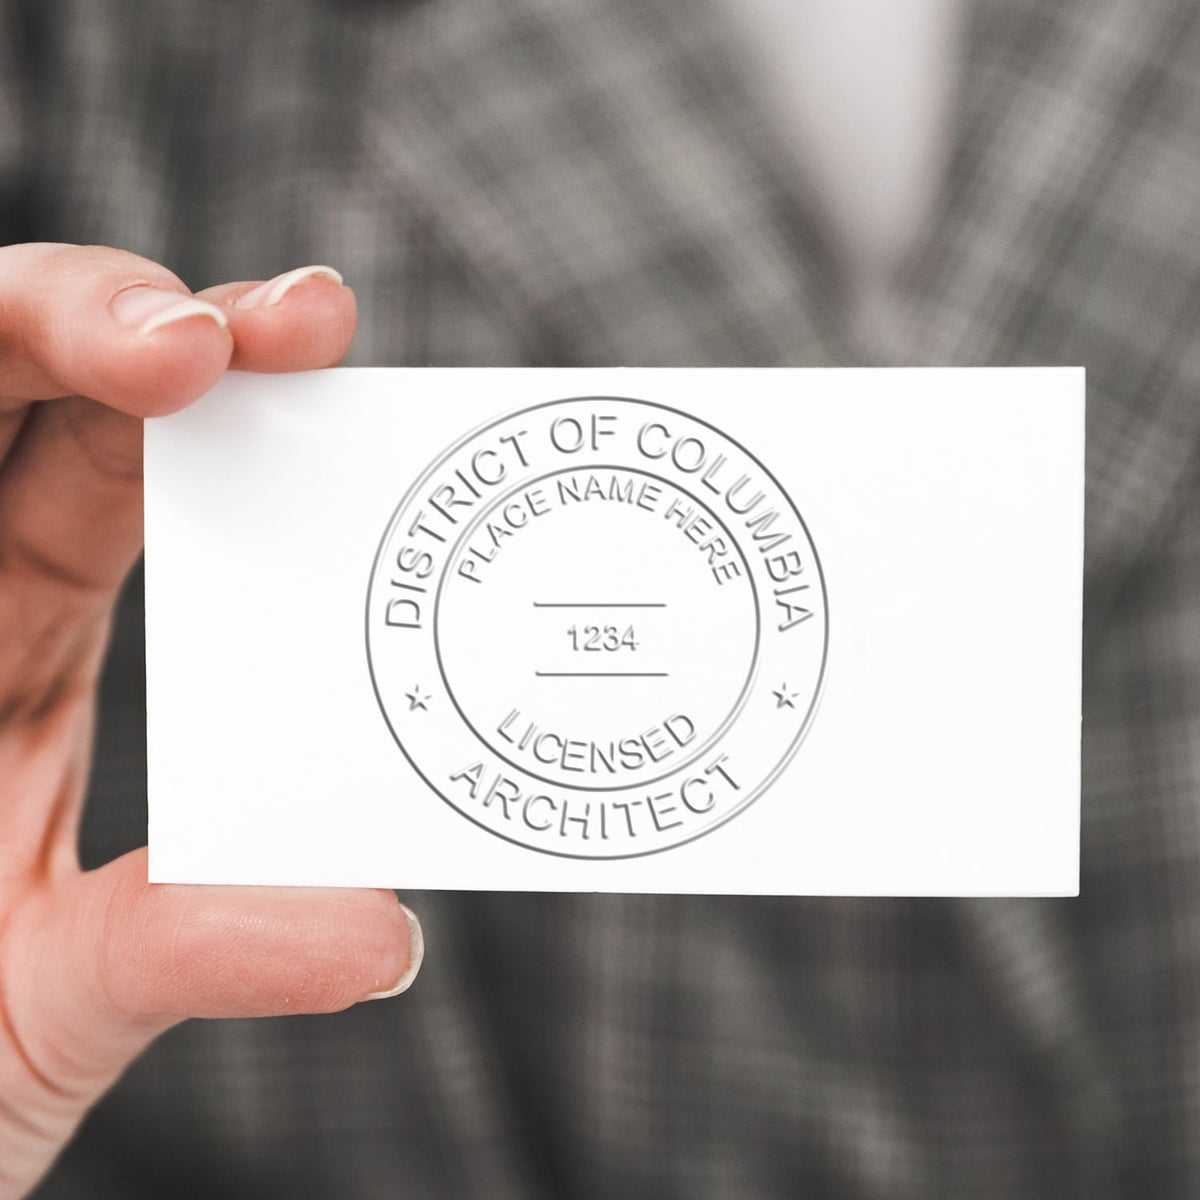 An alternative view of the Hybrid District of Columbia Architect Seal stamped on a sheet of paper showing the image in use